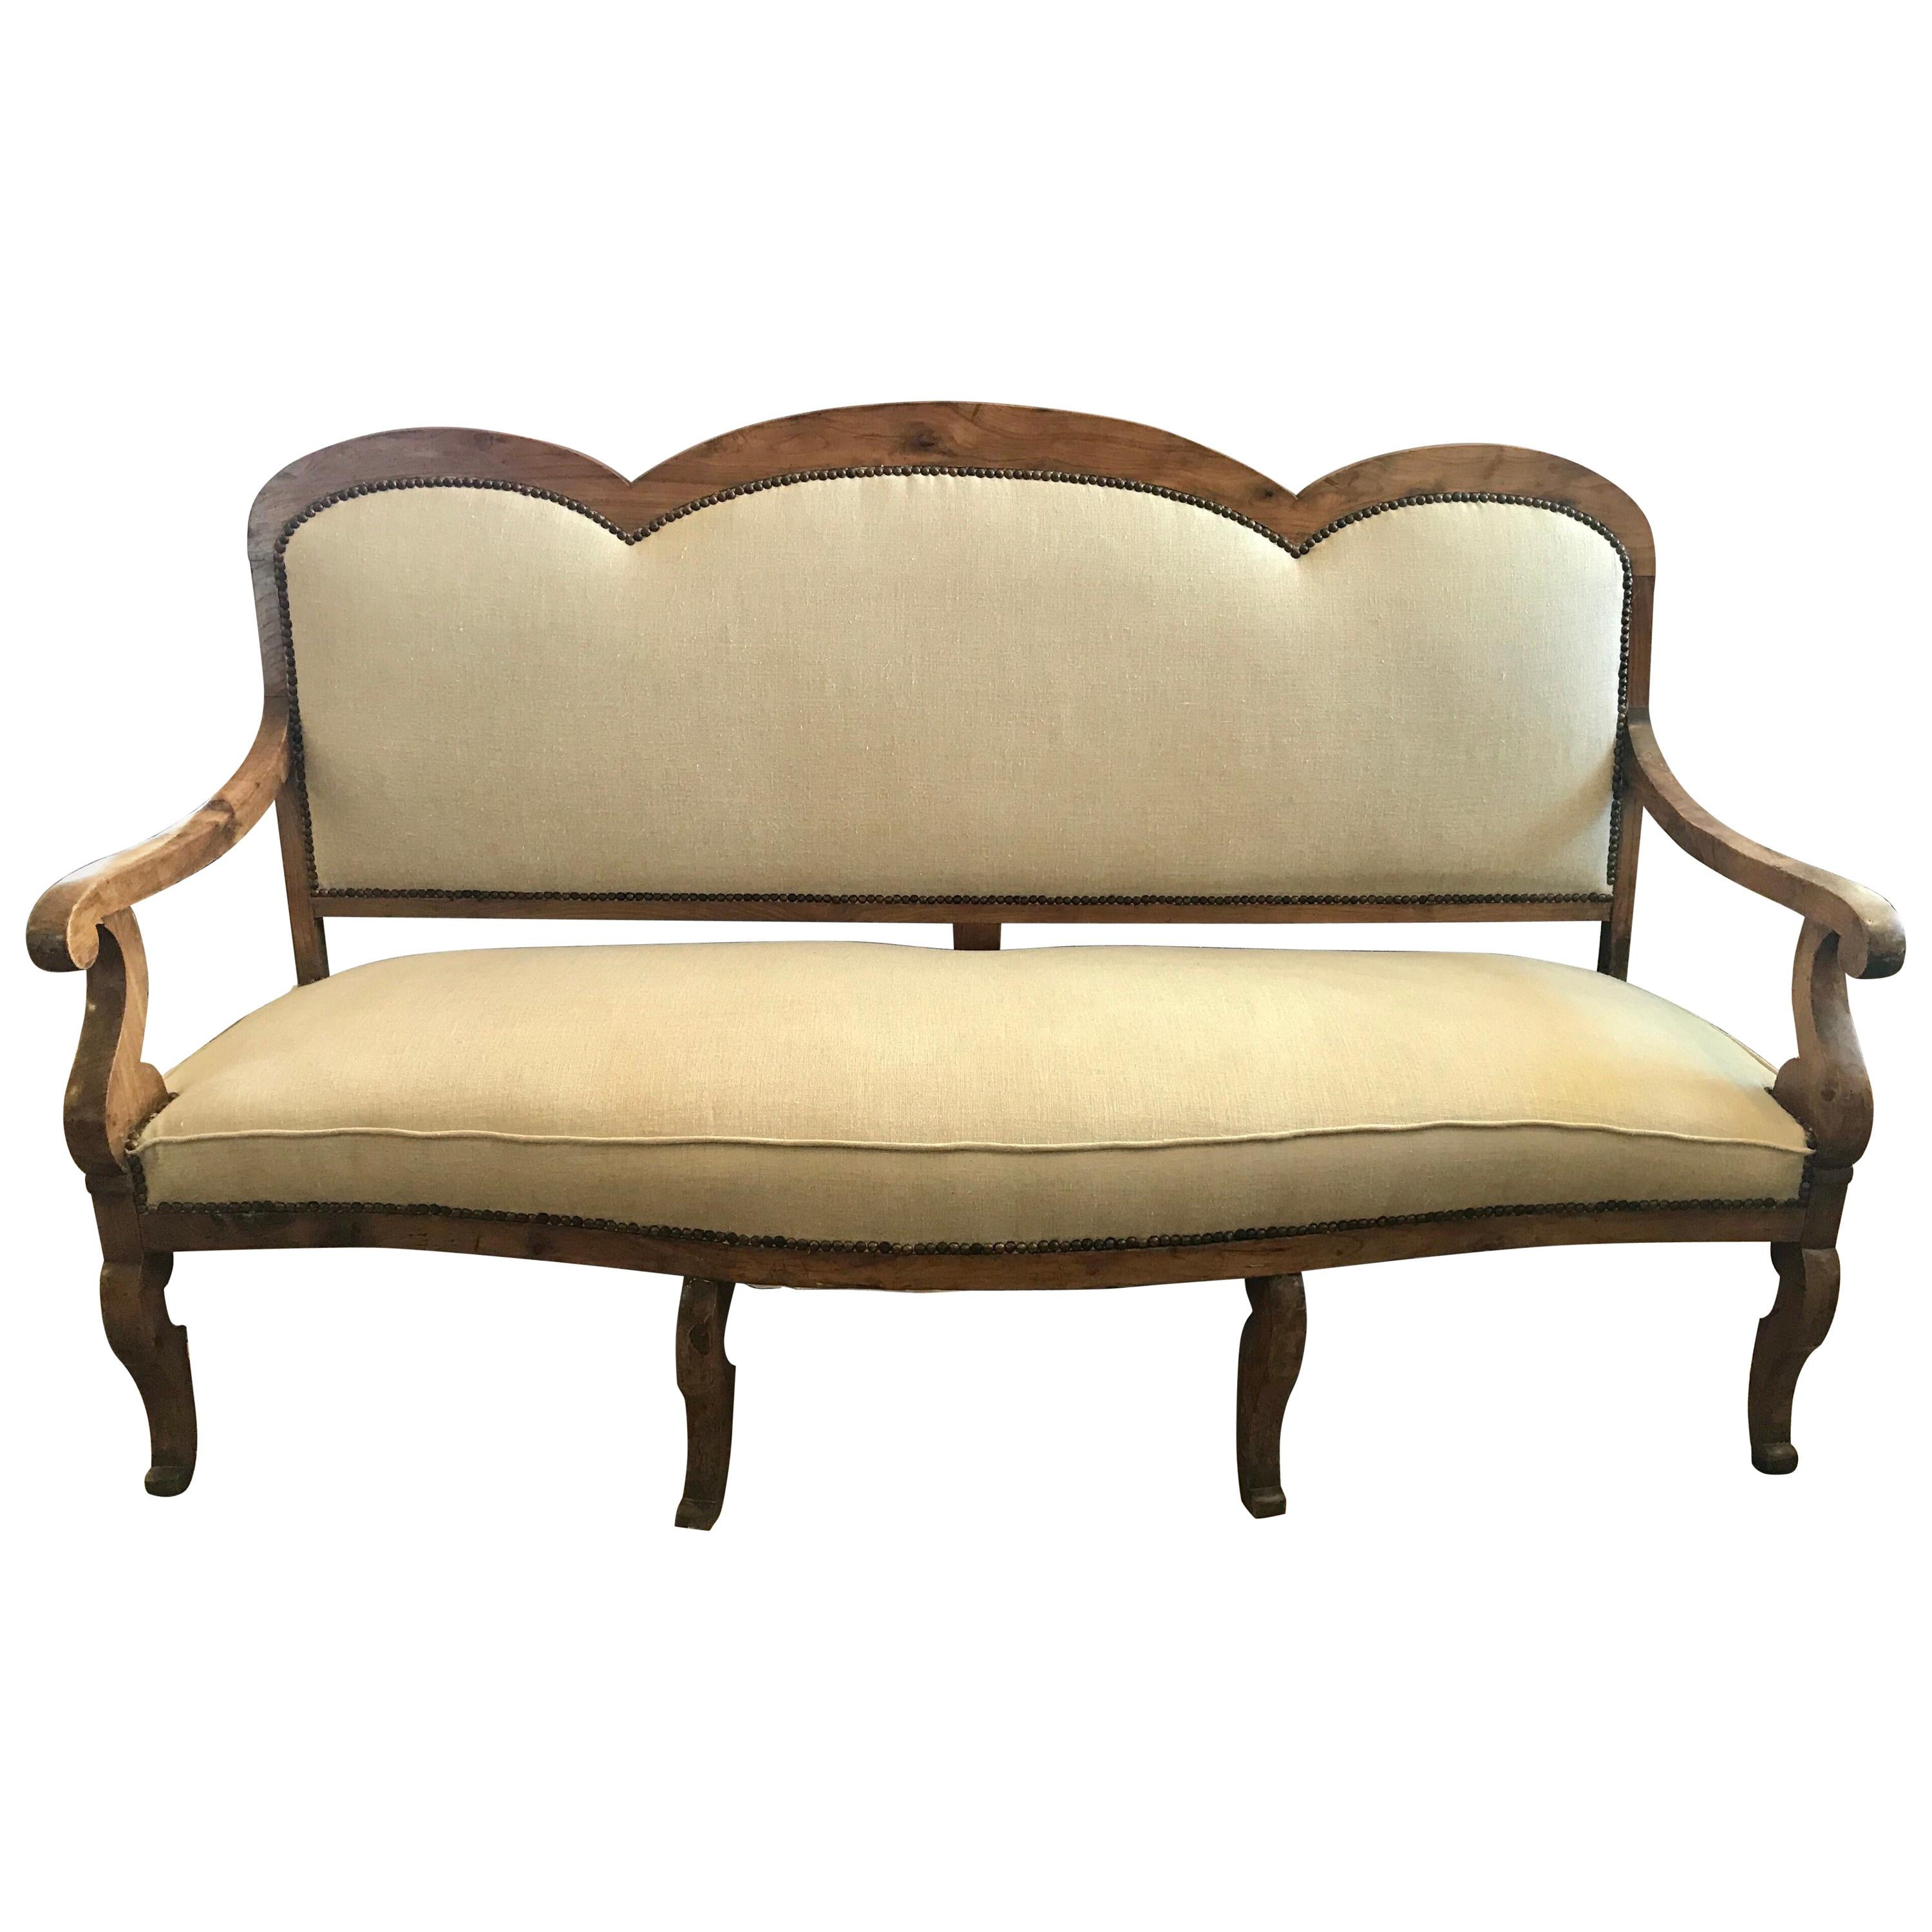 Antique Carved Wood French Settee Sofa Loveseat in Belgian Linen